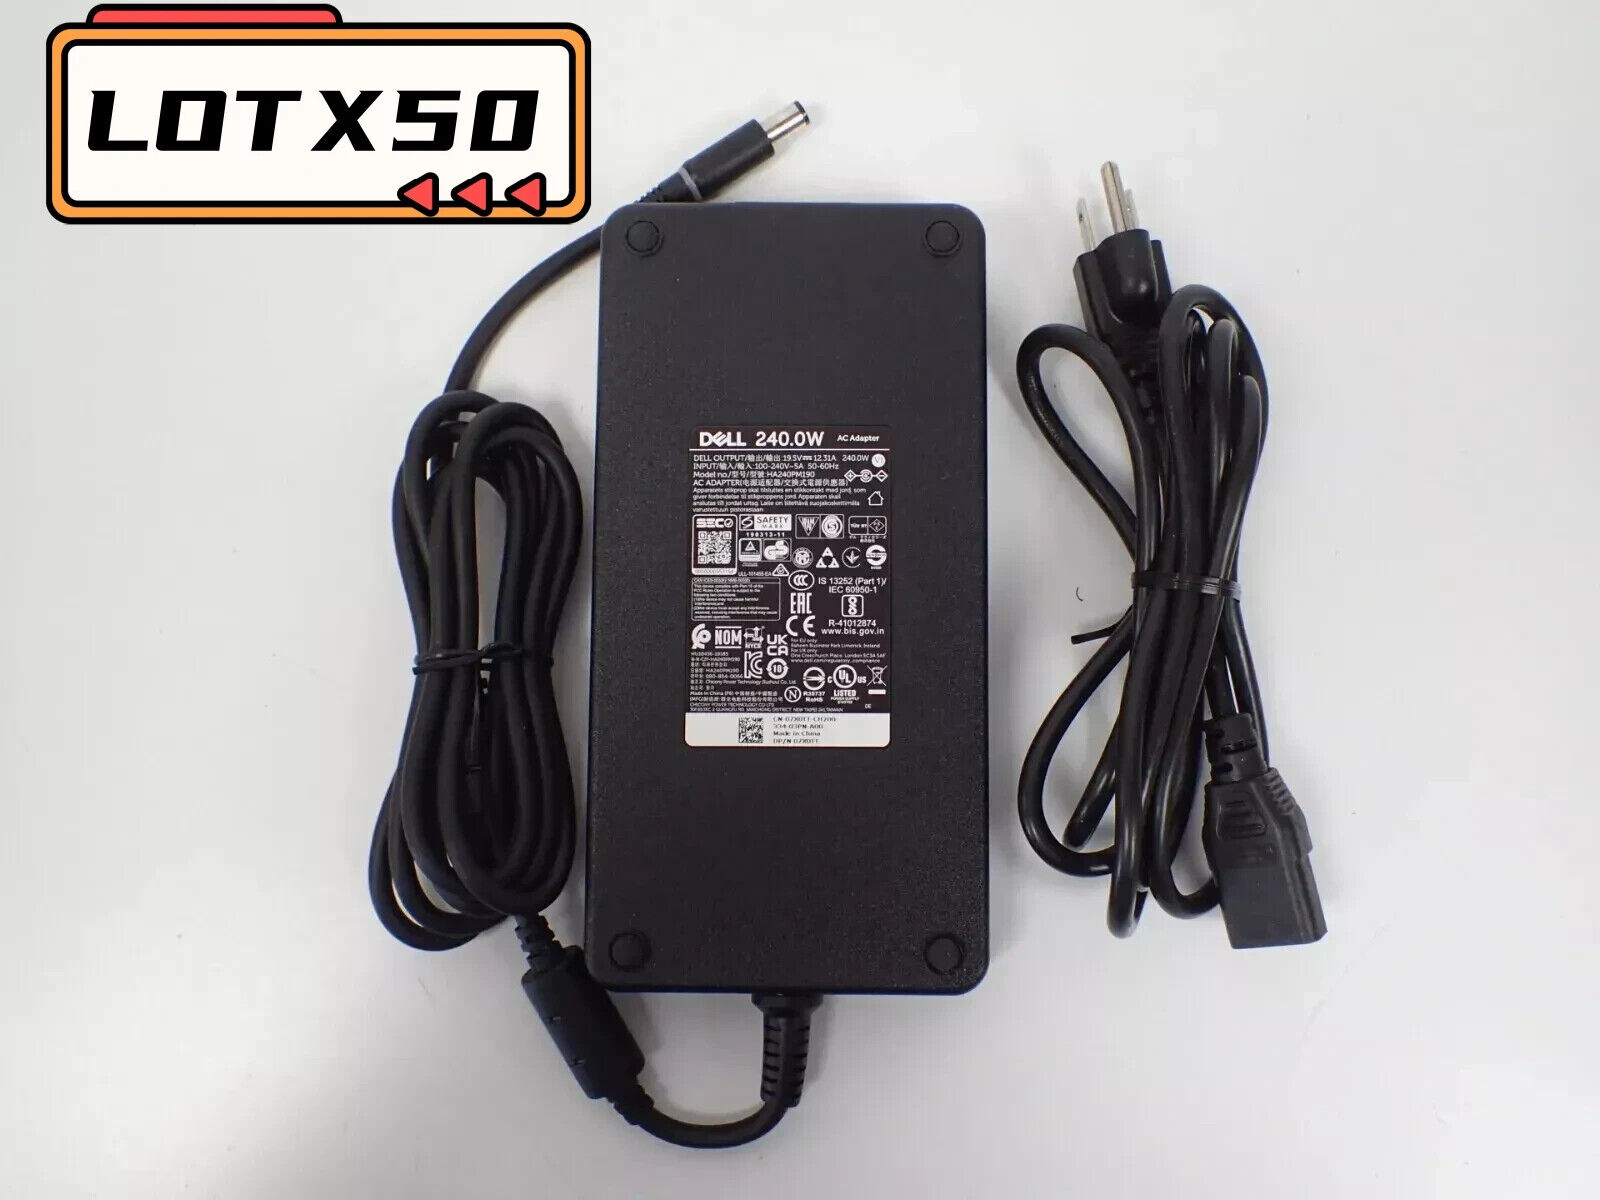 LOT 50 Genuine Dell AC Adapter 240W Charger G3 G7 Alienware x17 x15 M17x m15 R5